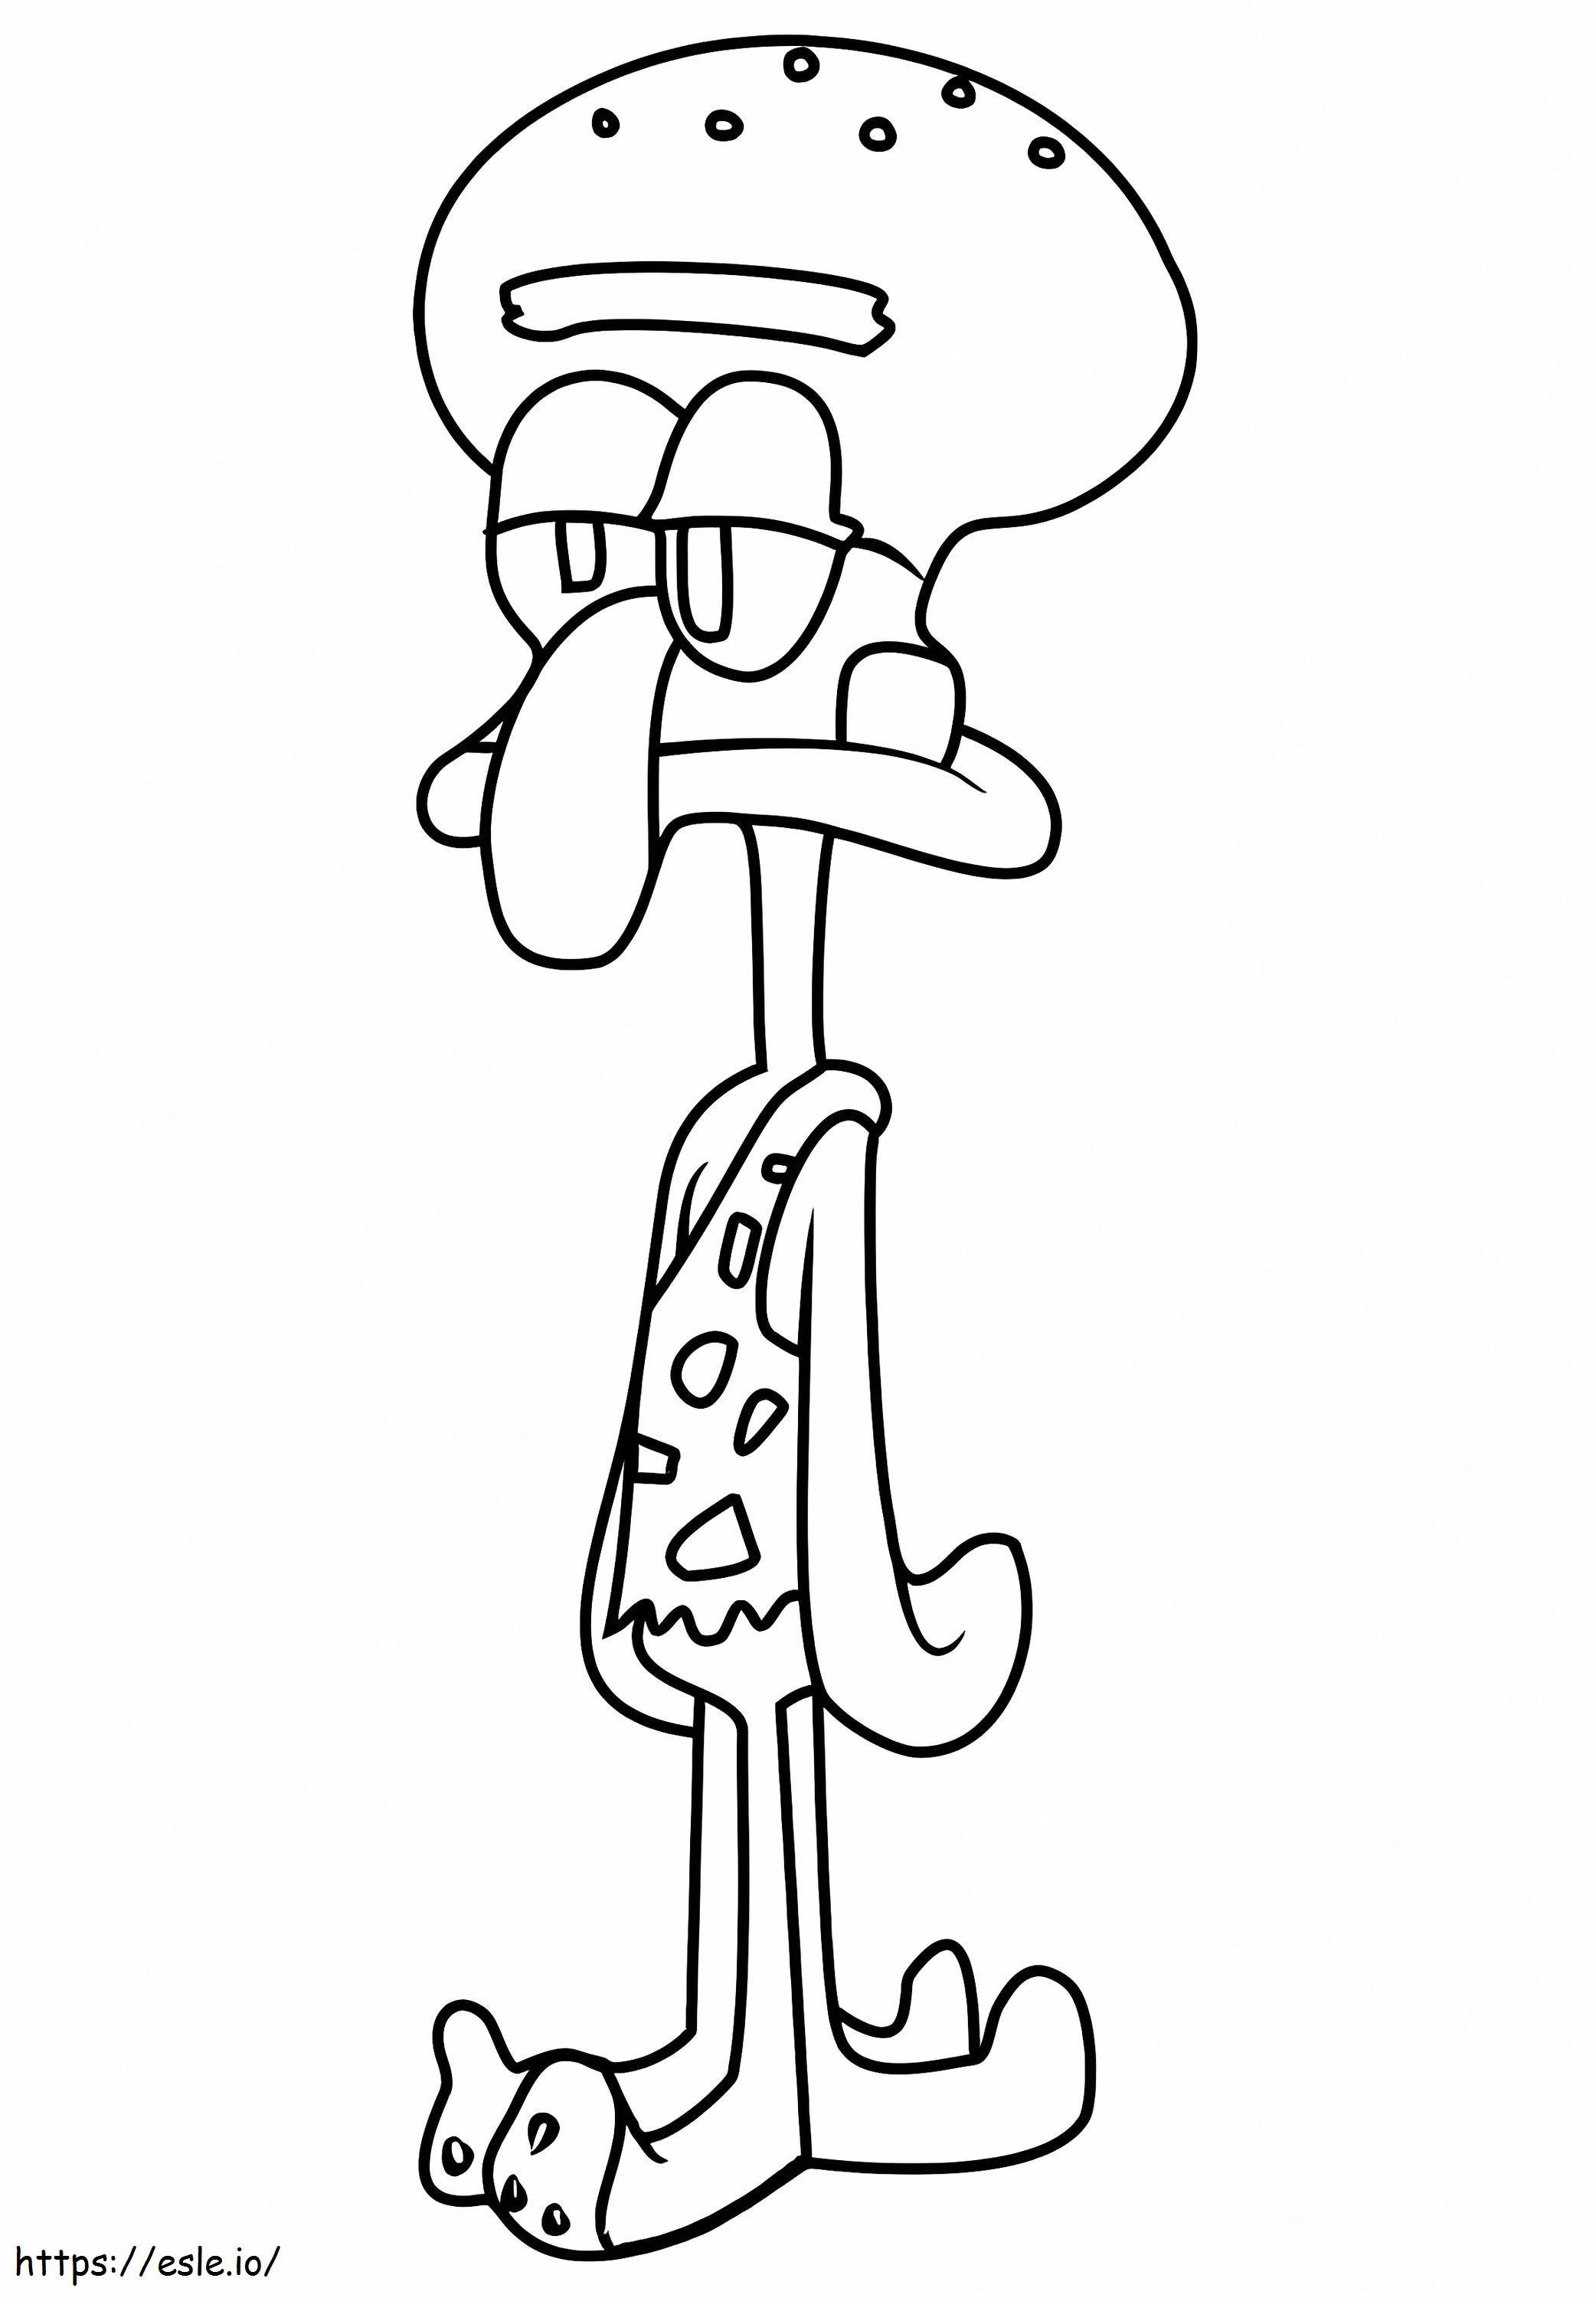 Squidward 2 coloring page